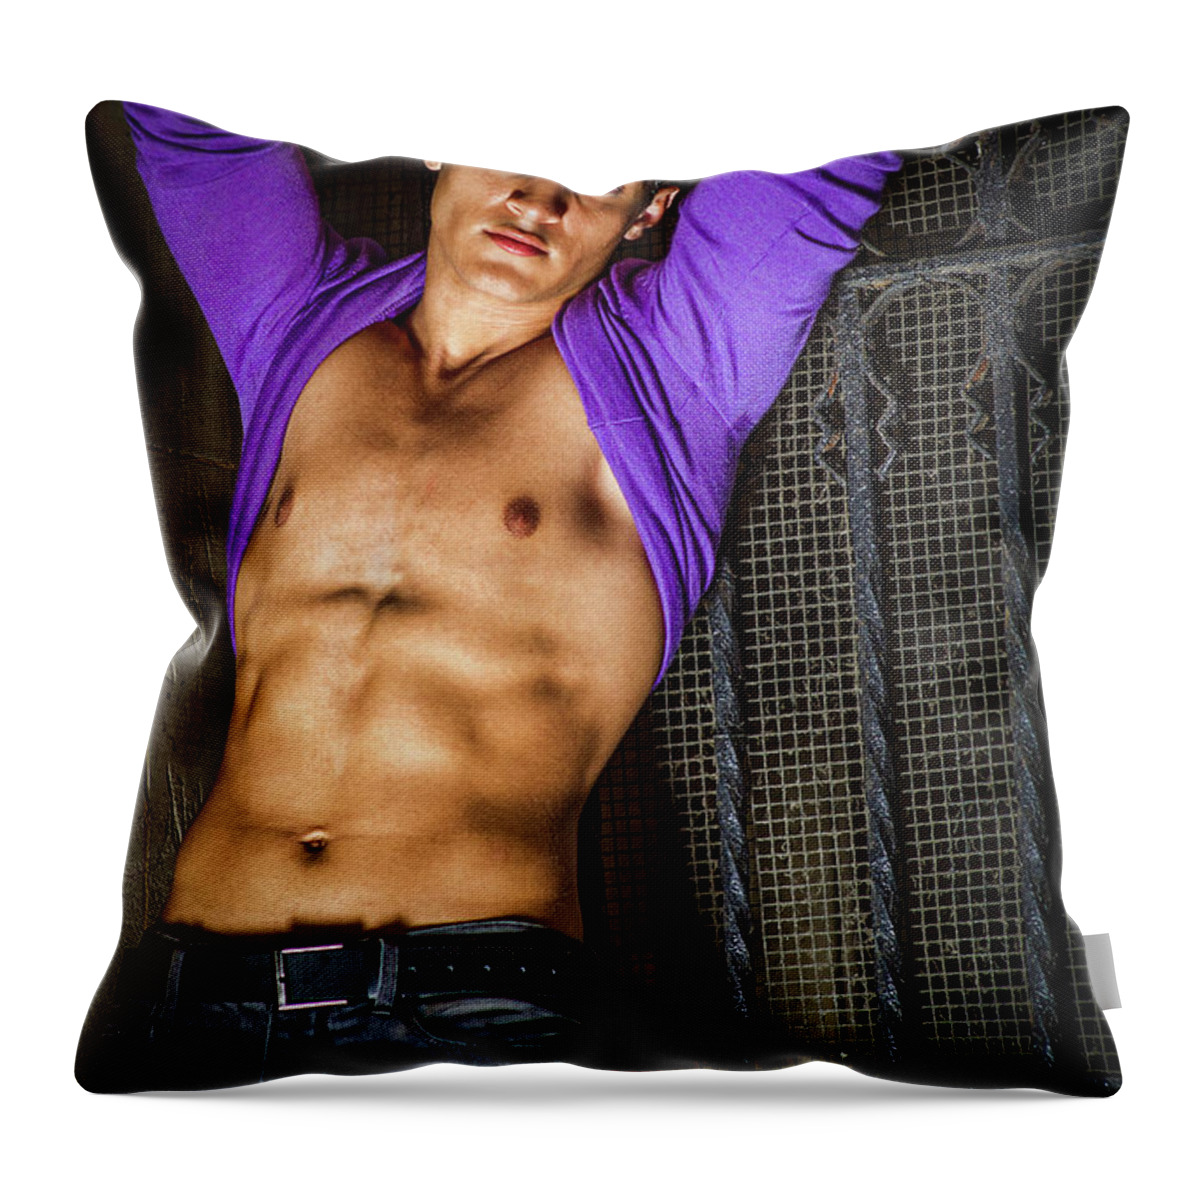 Body Throw Pillow featuring the photograph Heat by Alexander Image